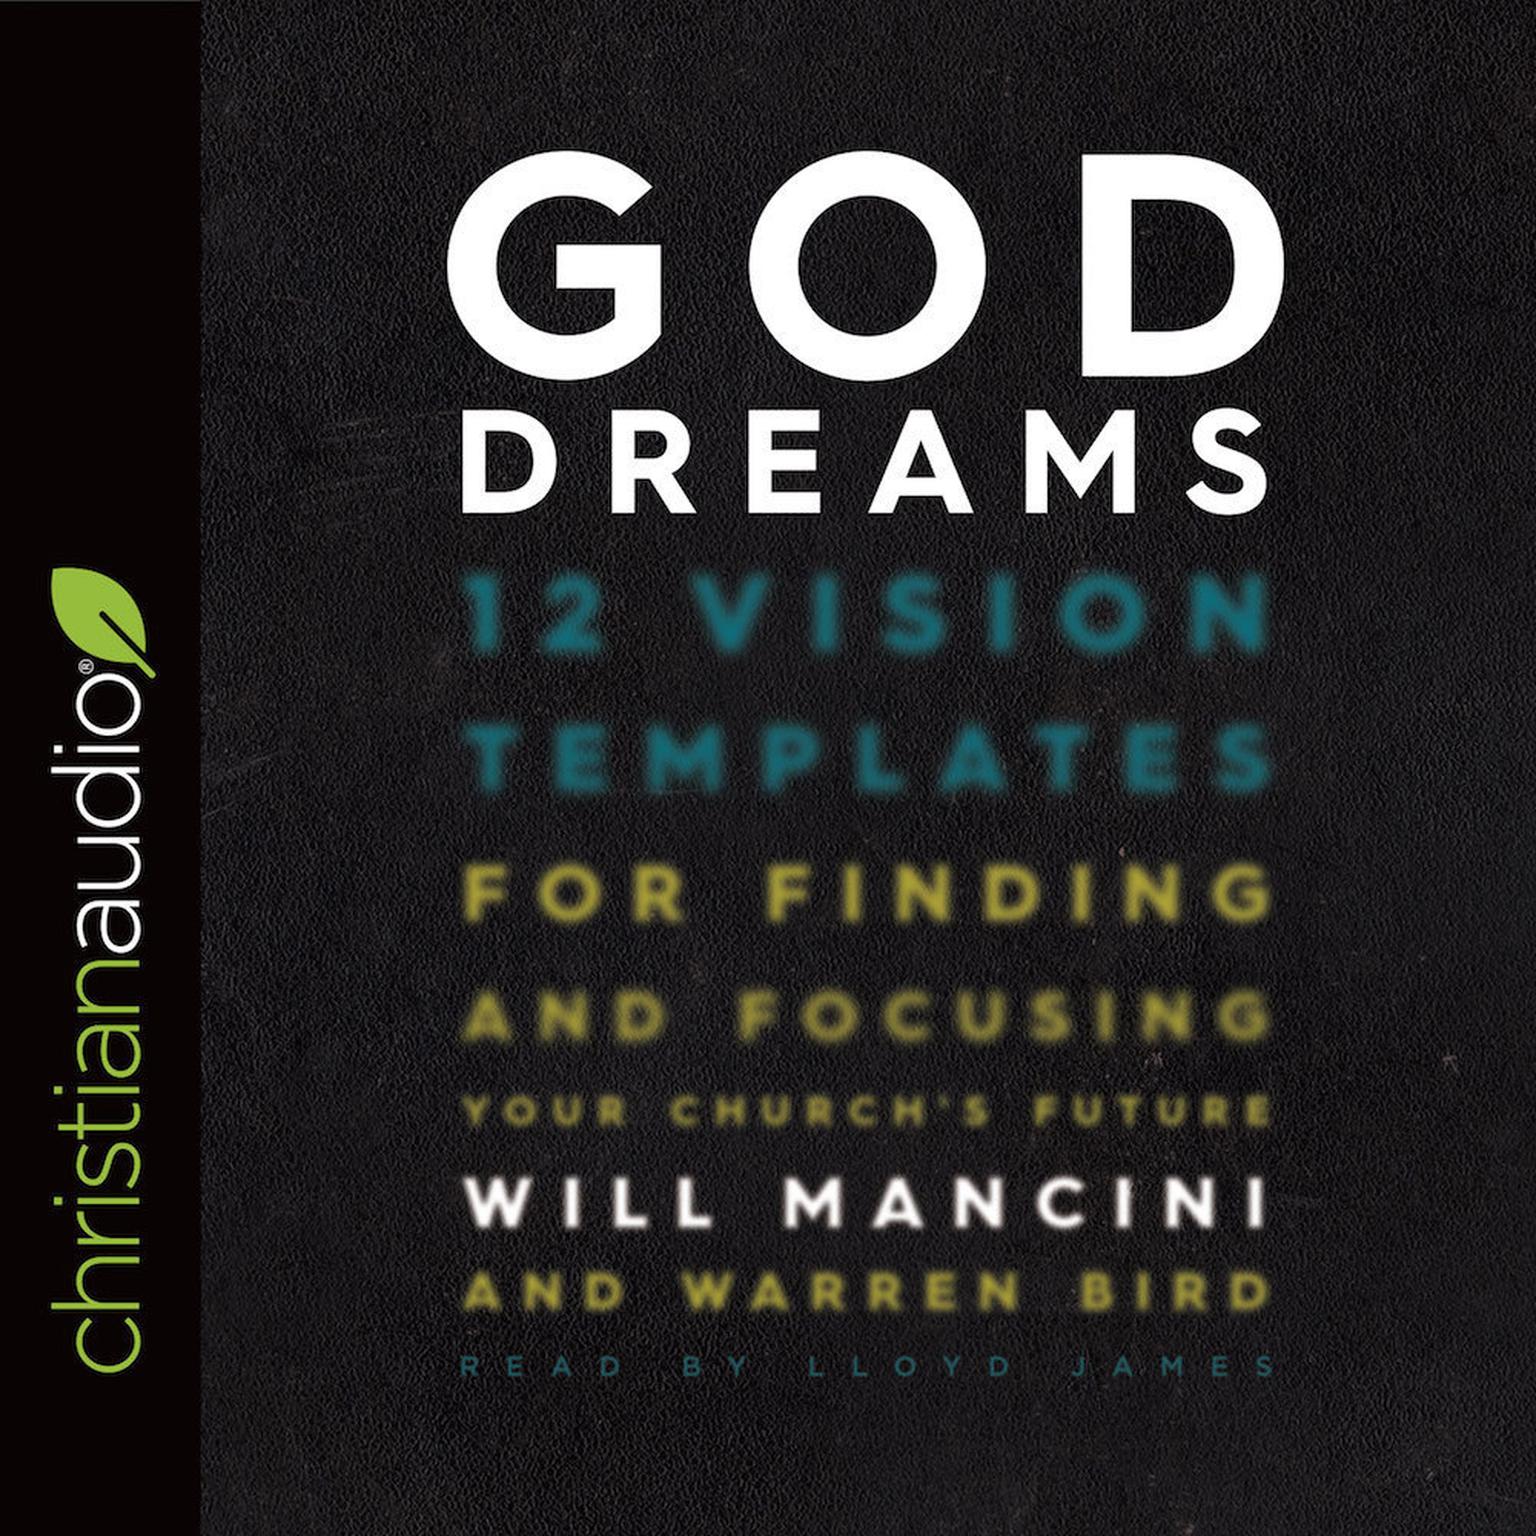 God Dreams: 12 Vision Templates for Finding and Focusing Your Churchs Future Audiobook, by Will Mancini